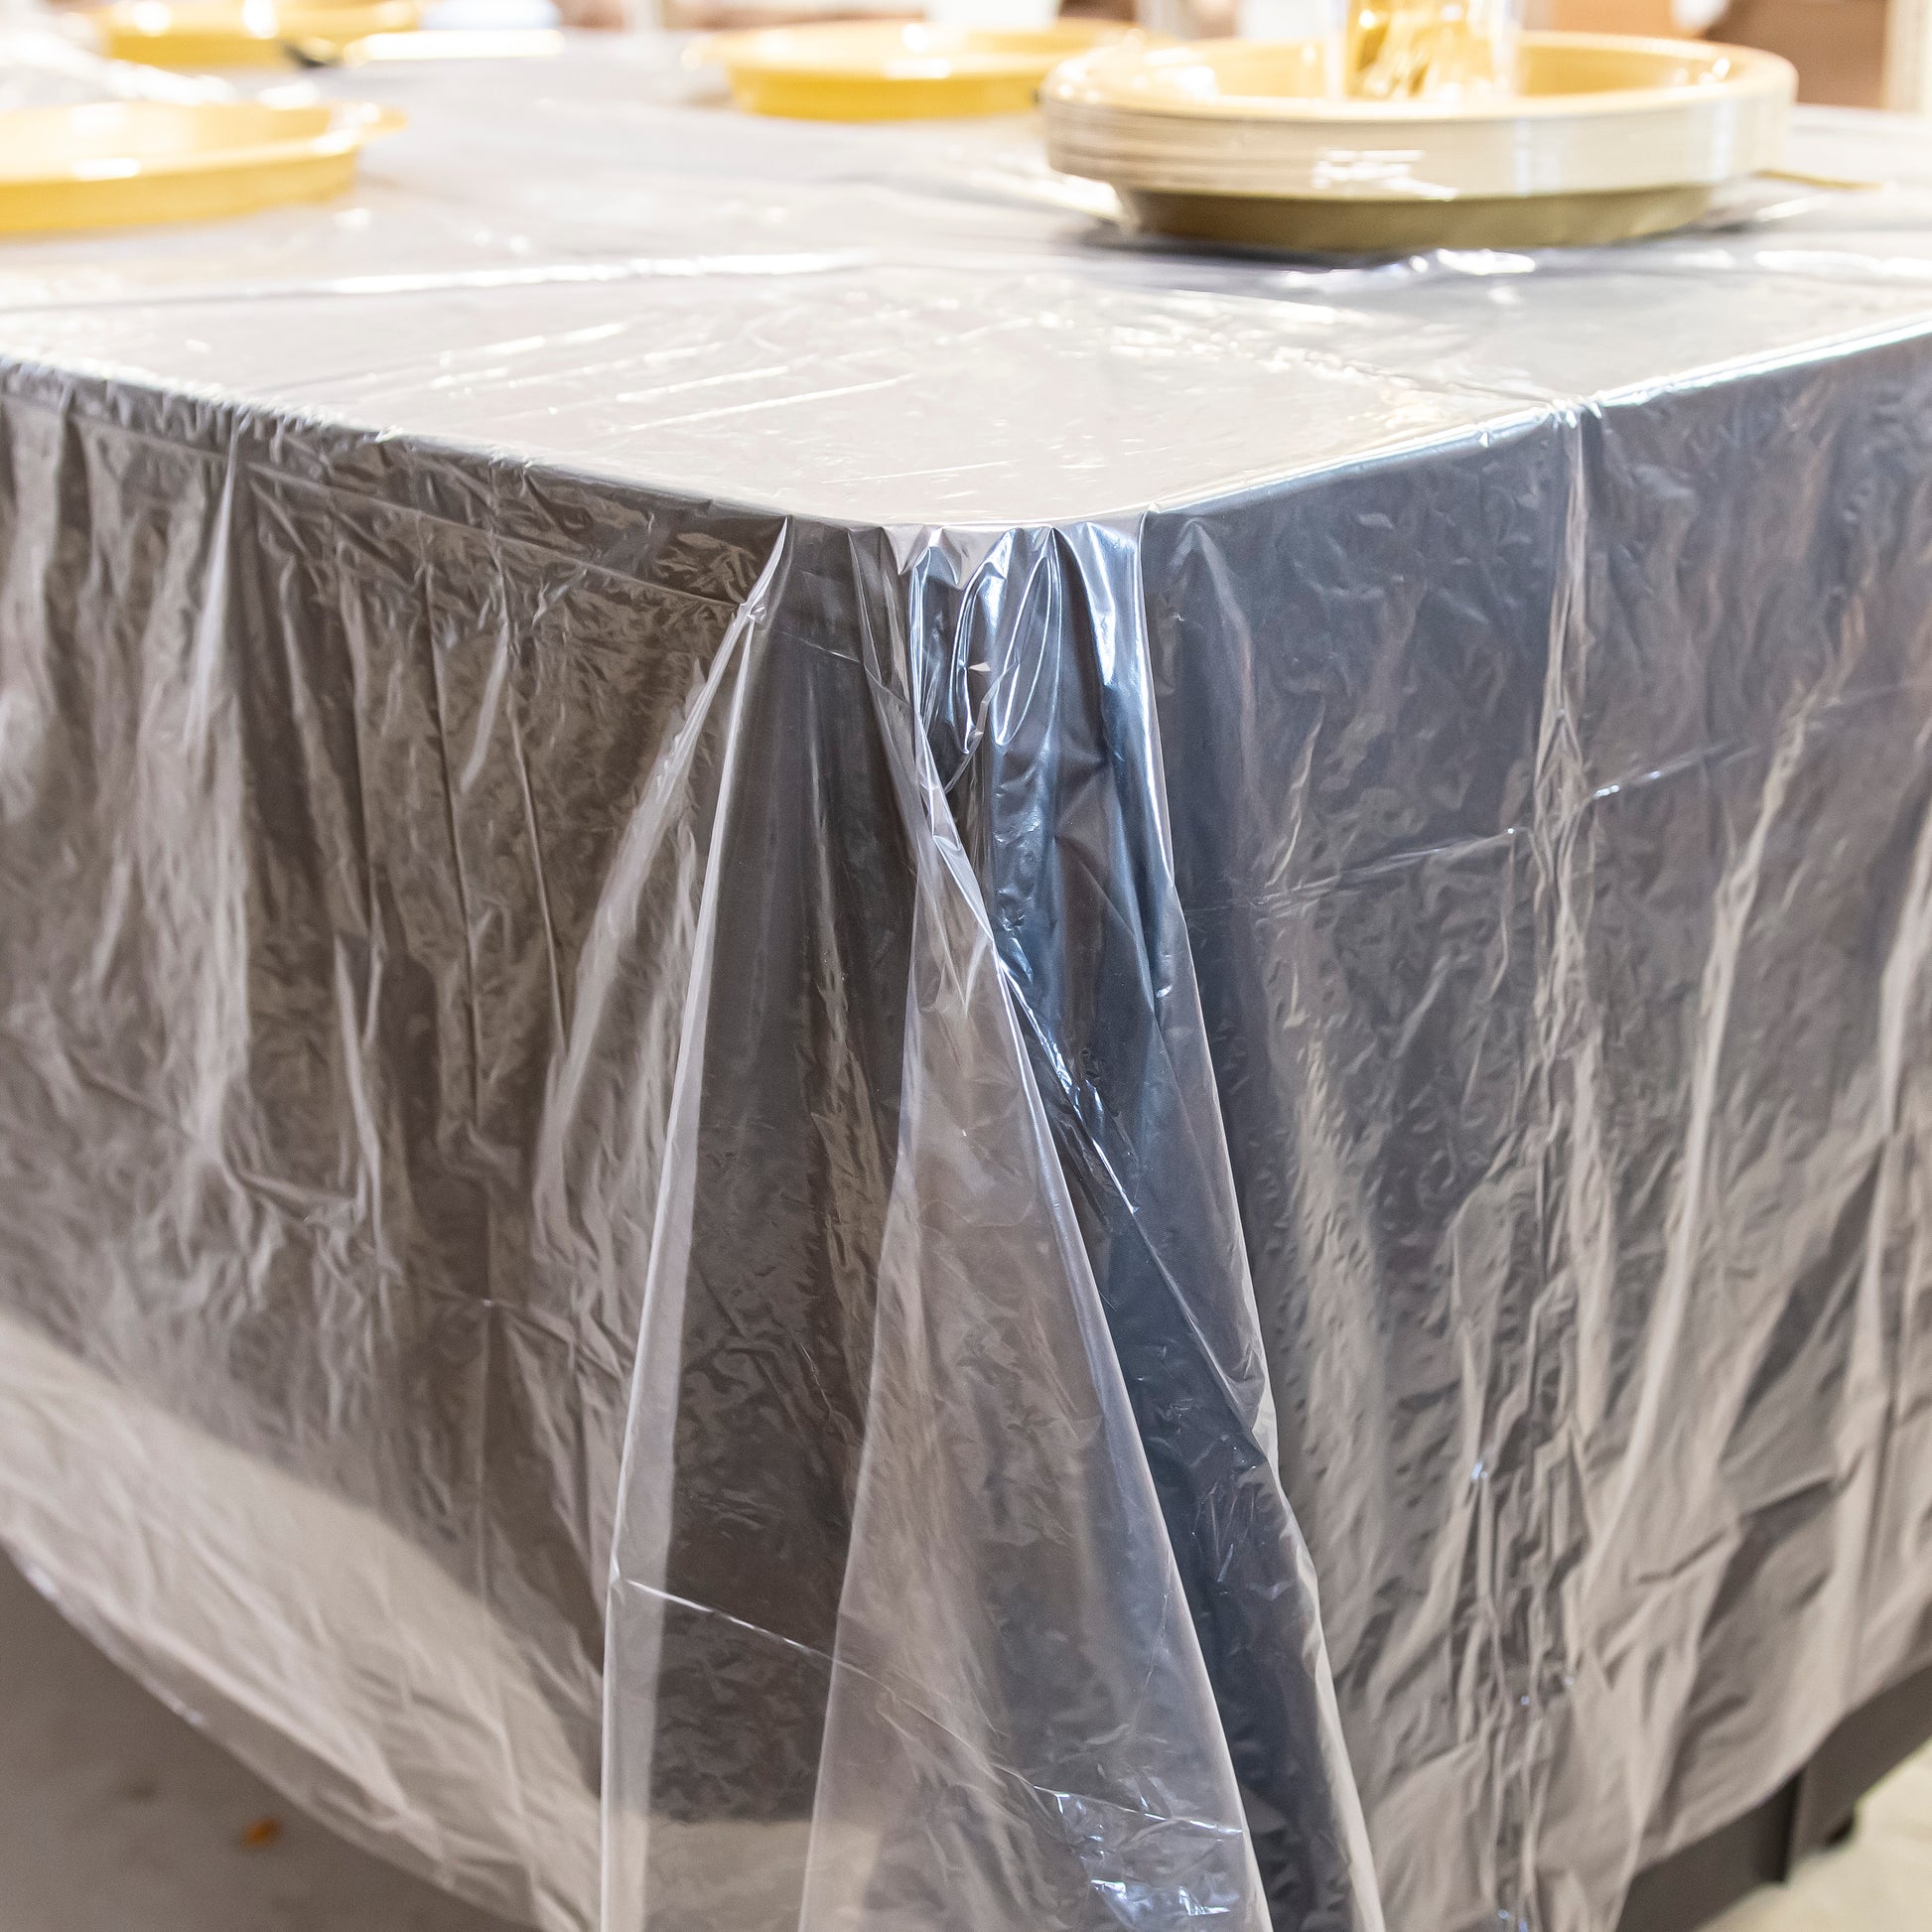 Kitchen Selection Heavy Weight Tablecloth 60X140 Tablesettings OnlyOneStopShop   